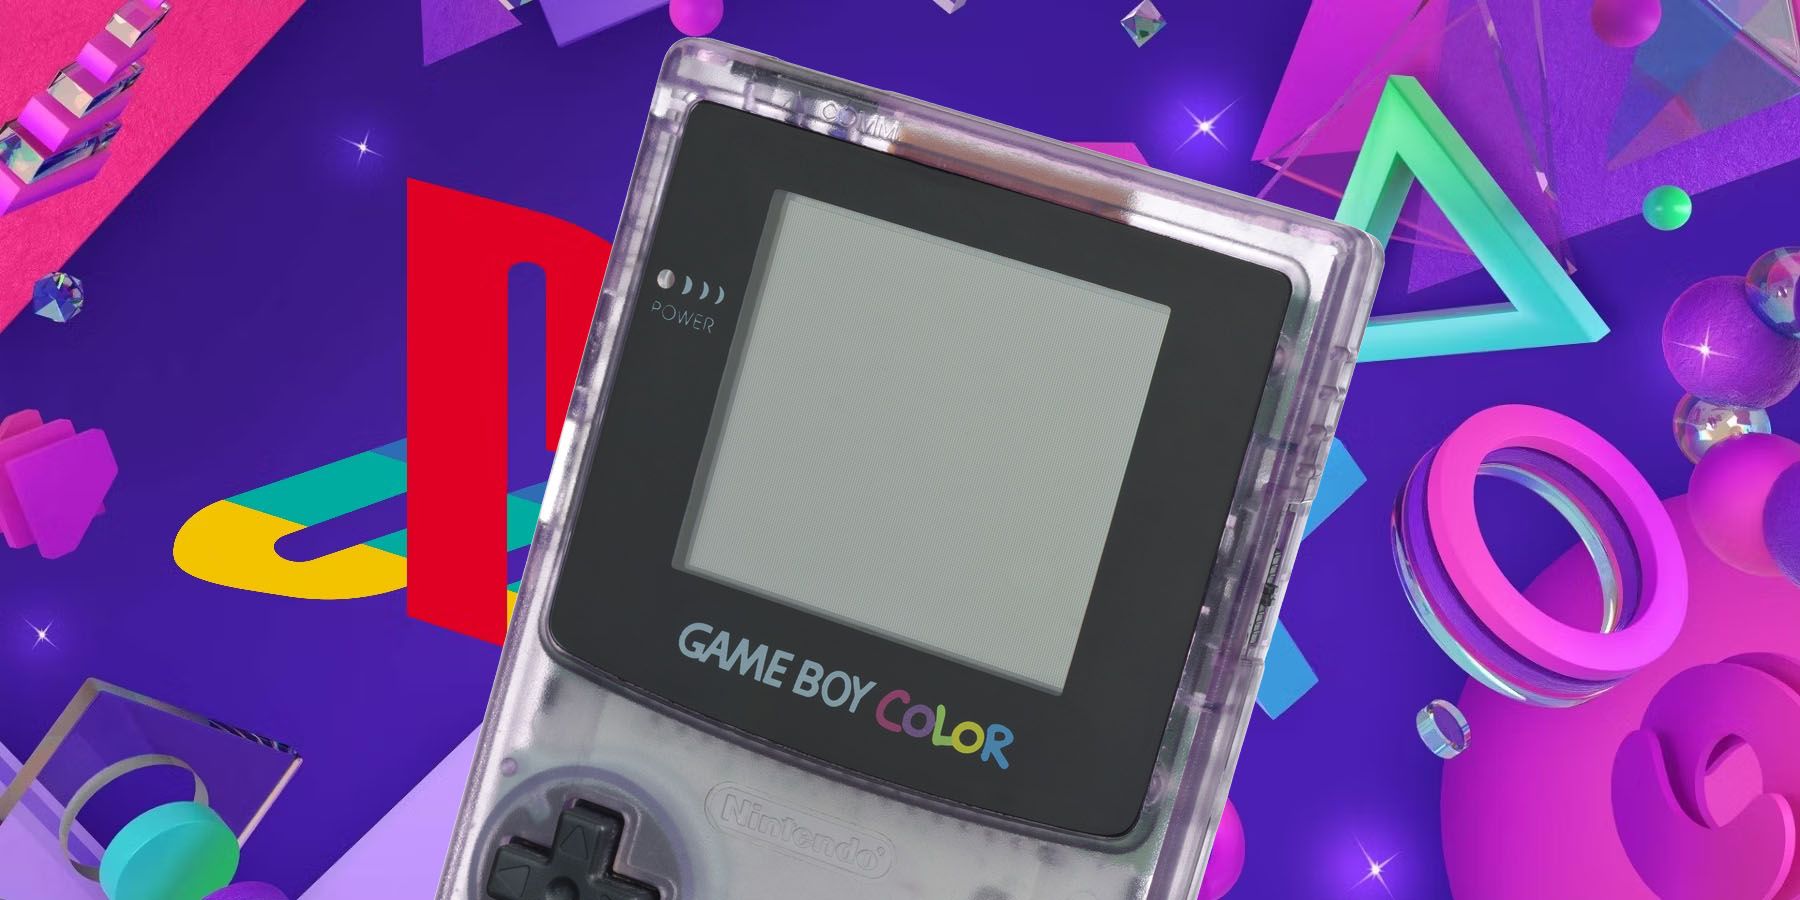 A Nintendo Game Boy Color placed in front of a background of PlayStation logos and button symbols.